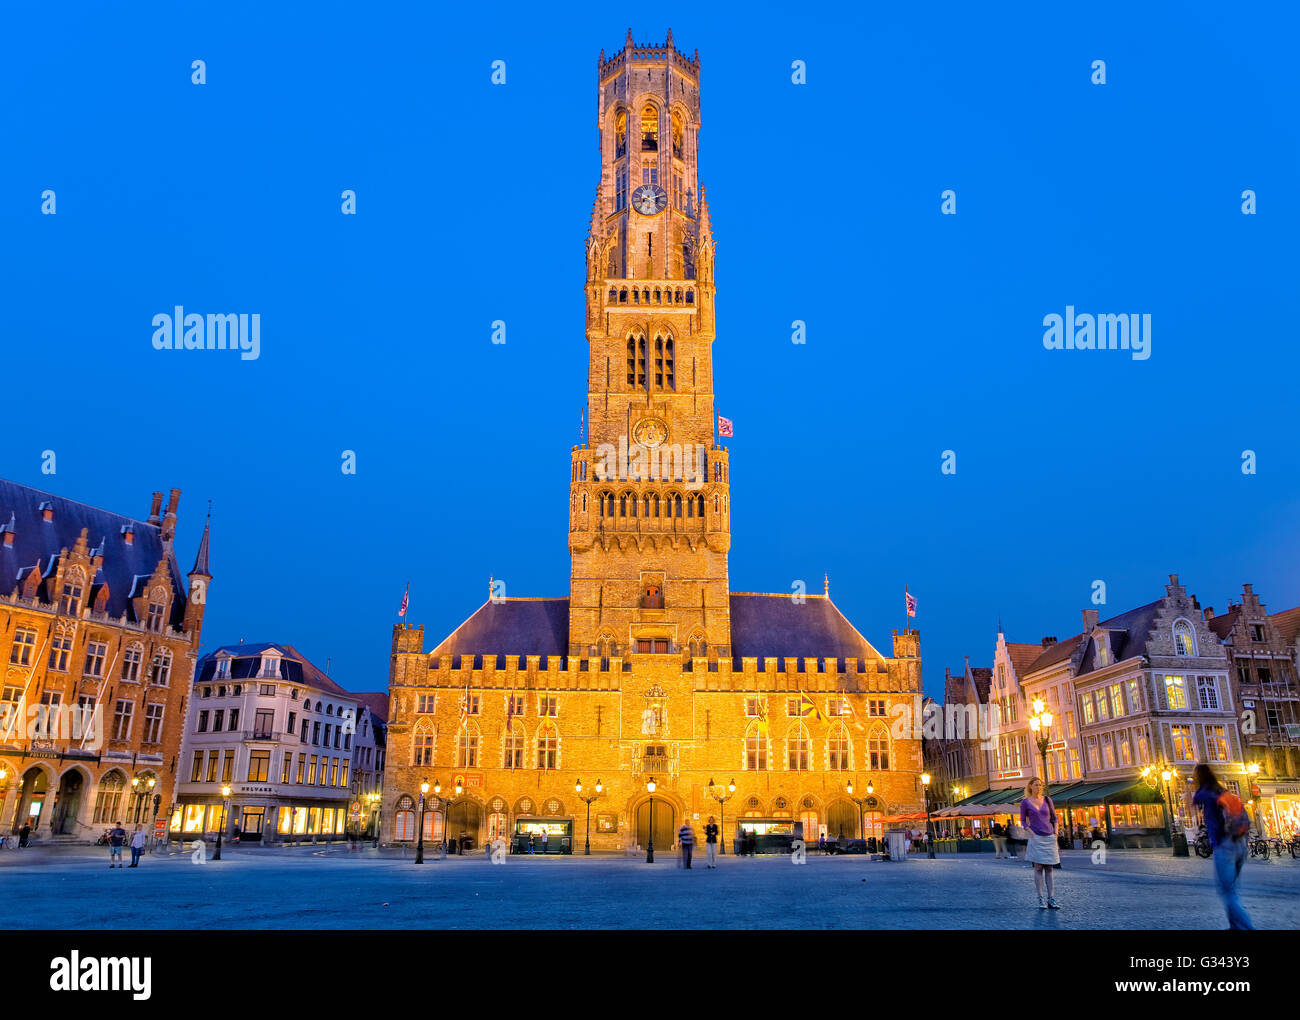 Belfry of Bruges at night Stock Photo